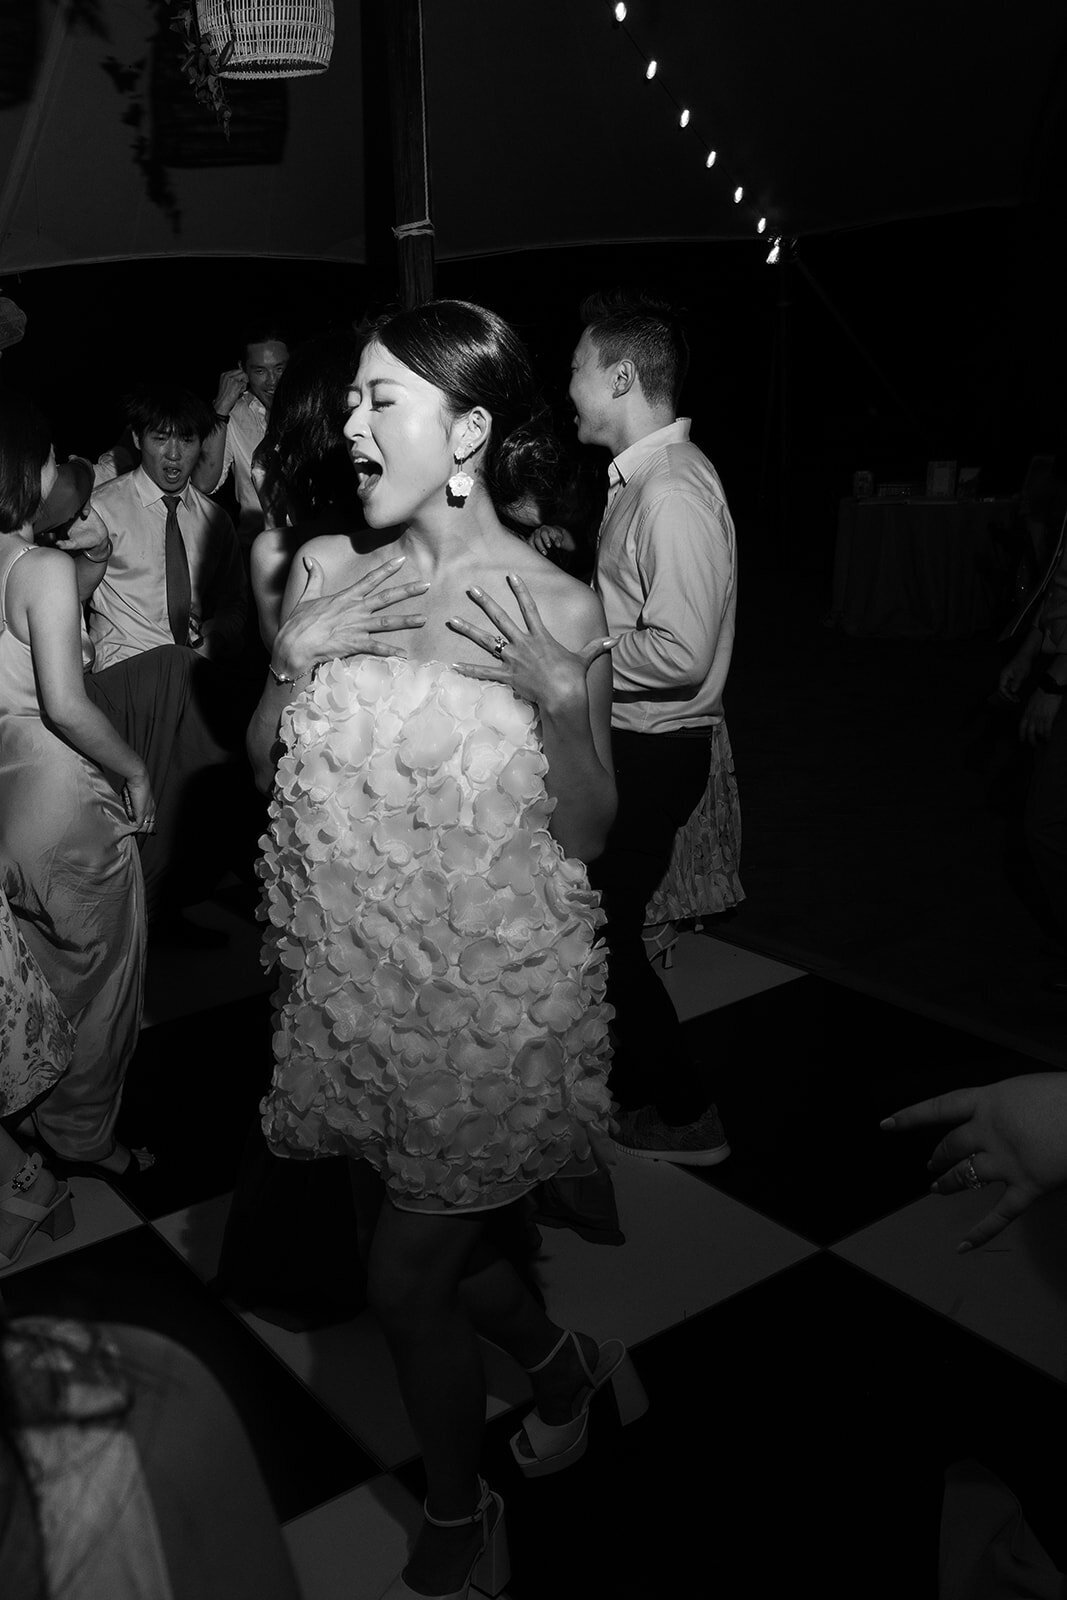 Bride in a dress dancing with other people around